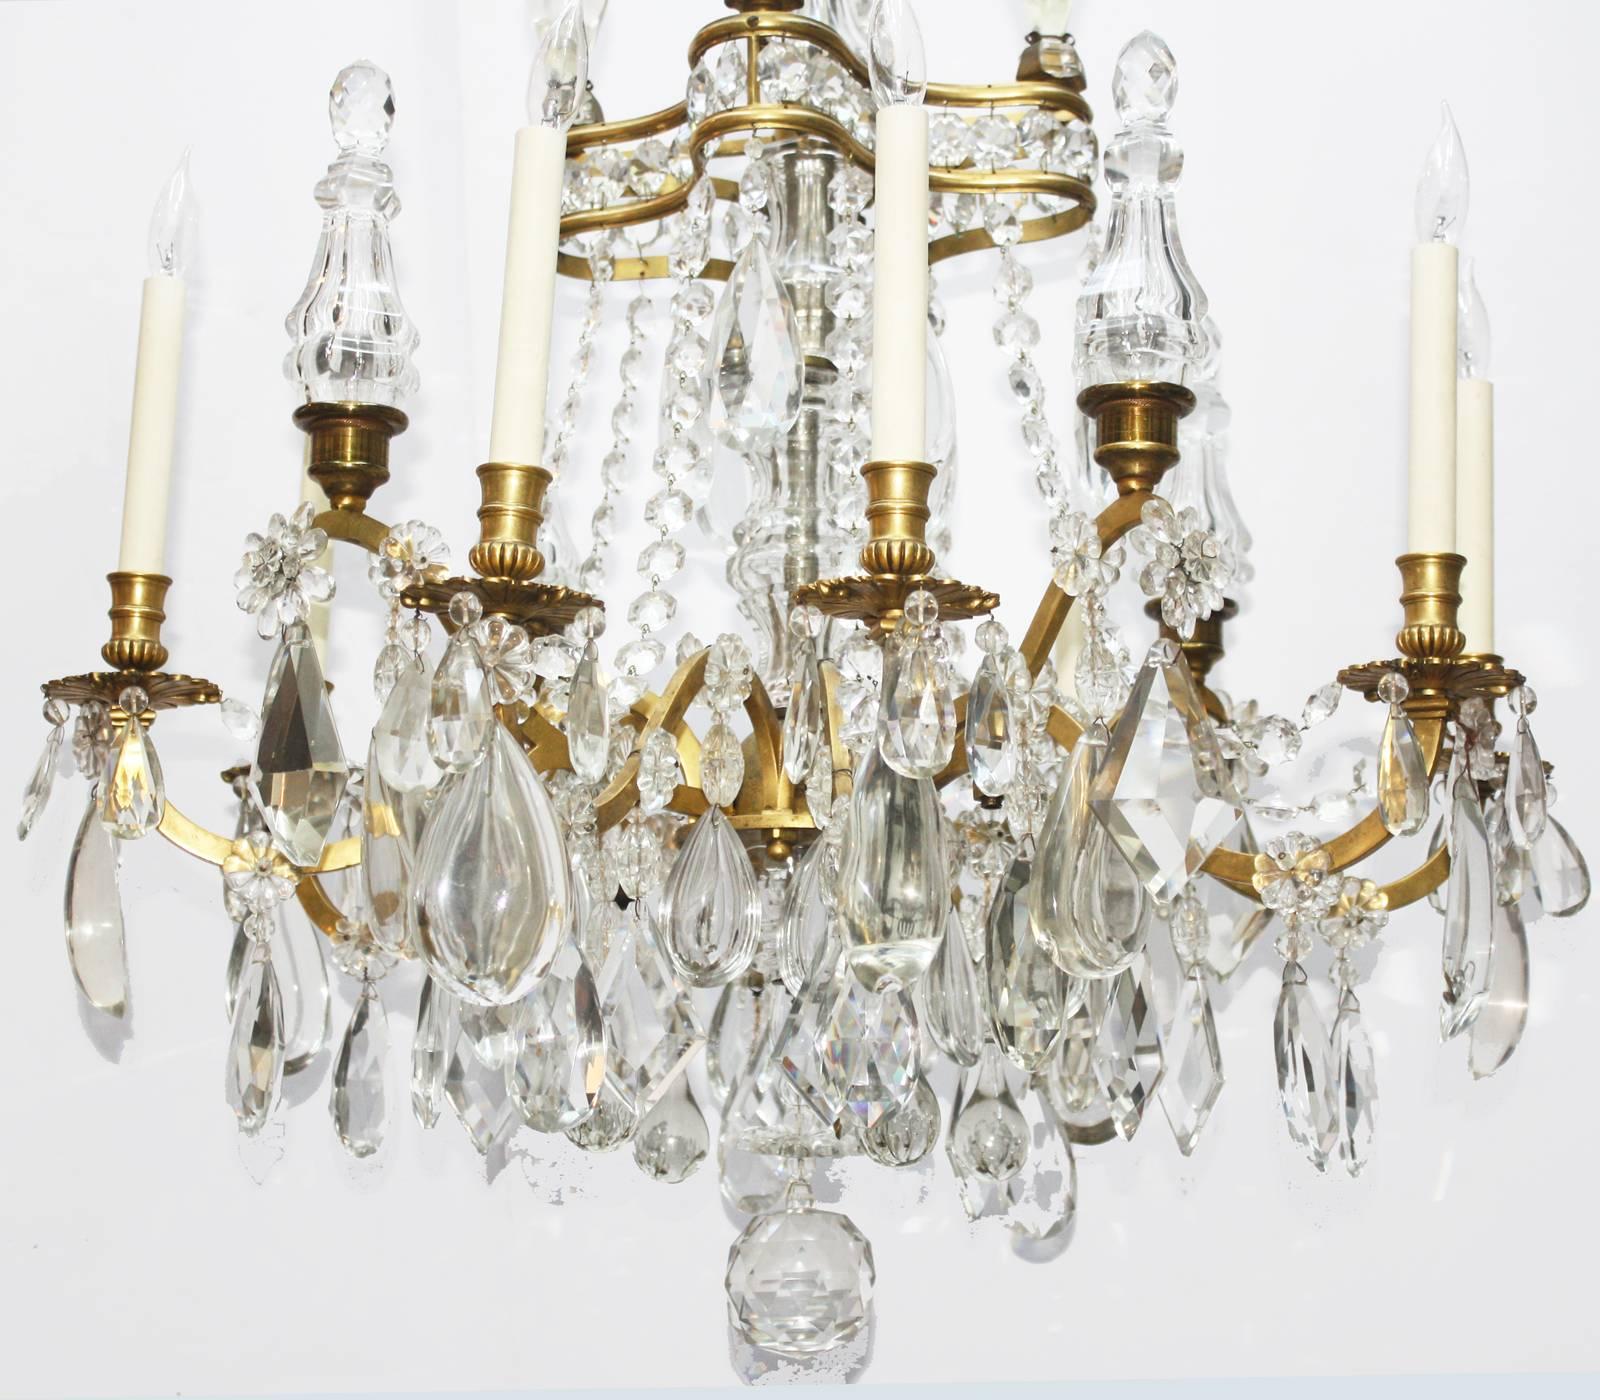 Beautiful French crystal chandelier with canopy of arched gilt bronze arms hung with flower shaped crystal beads with oval crystal drops, over a cut crystal column. A centre double banded quatrefoil of gilt bronze separated by octagon jewel